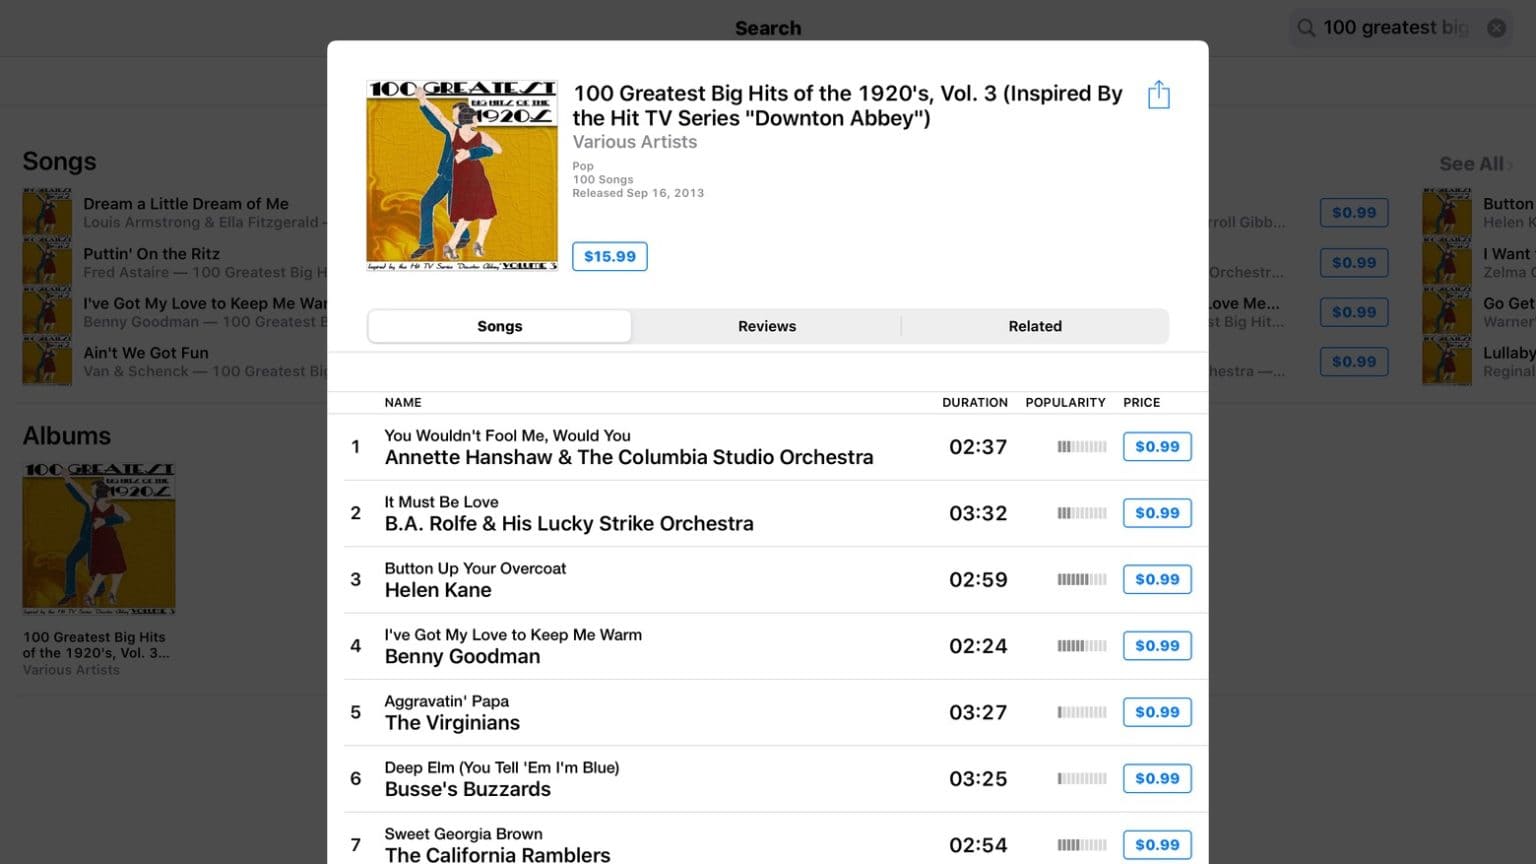 100 Greatest Big Hits of the 1920's, Vol. 3 continues multipolar examples of music piracy on Apple iTunes.